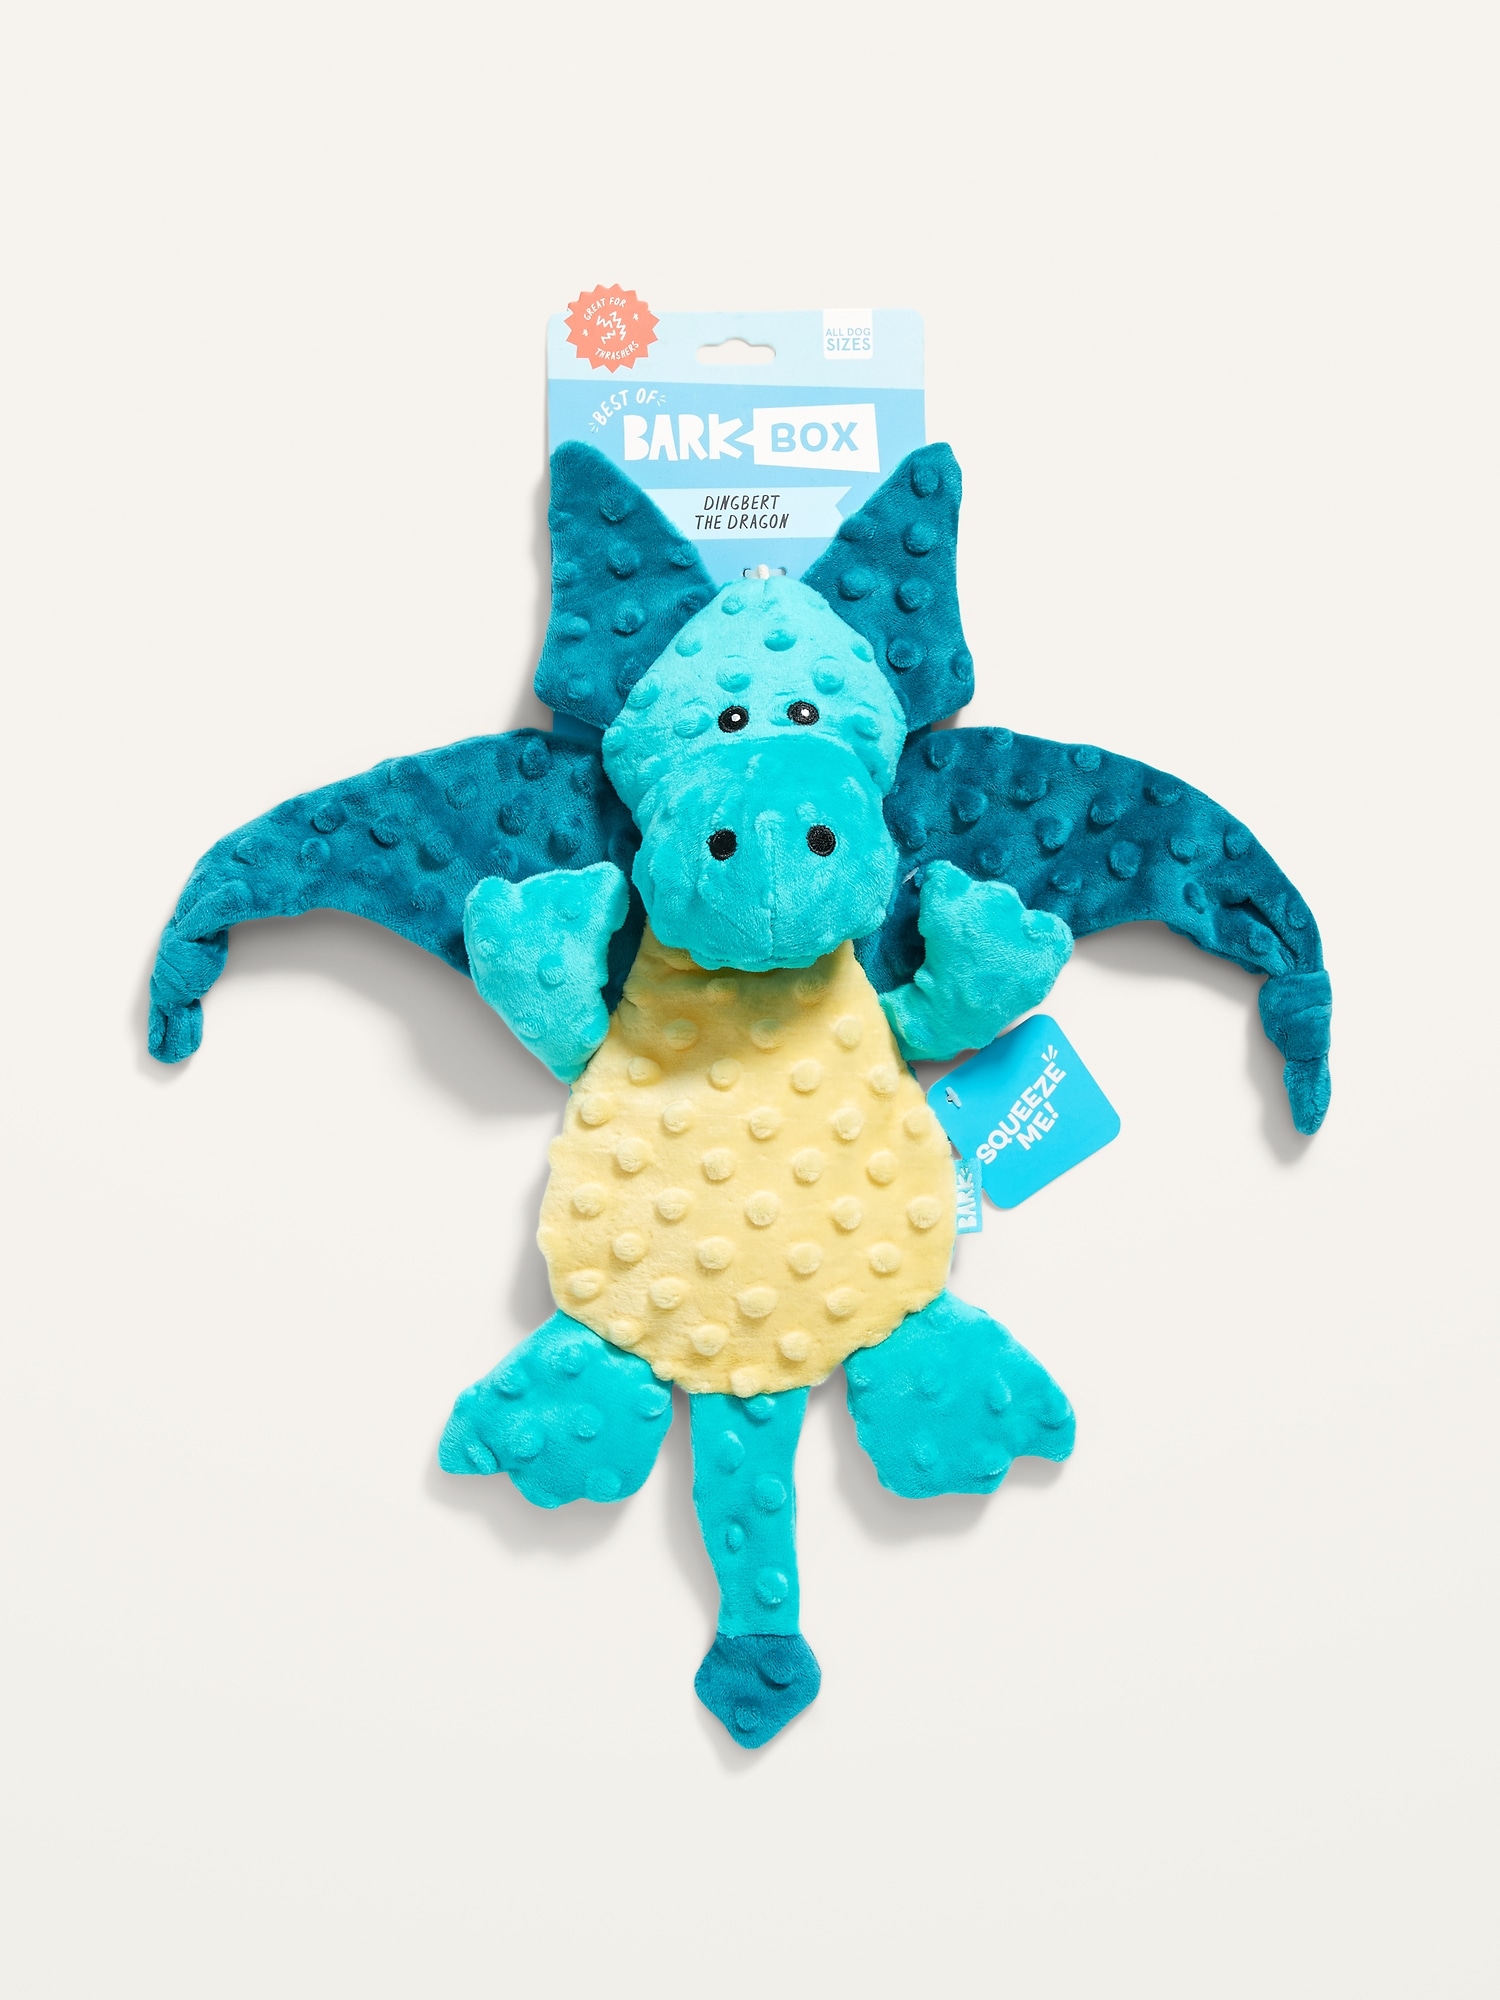 BARK™ Plush Toy for Pets